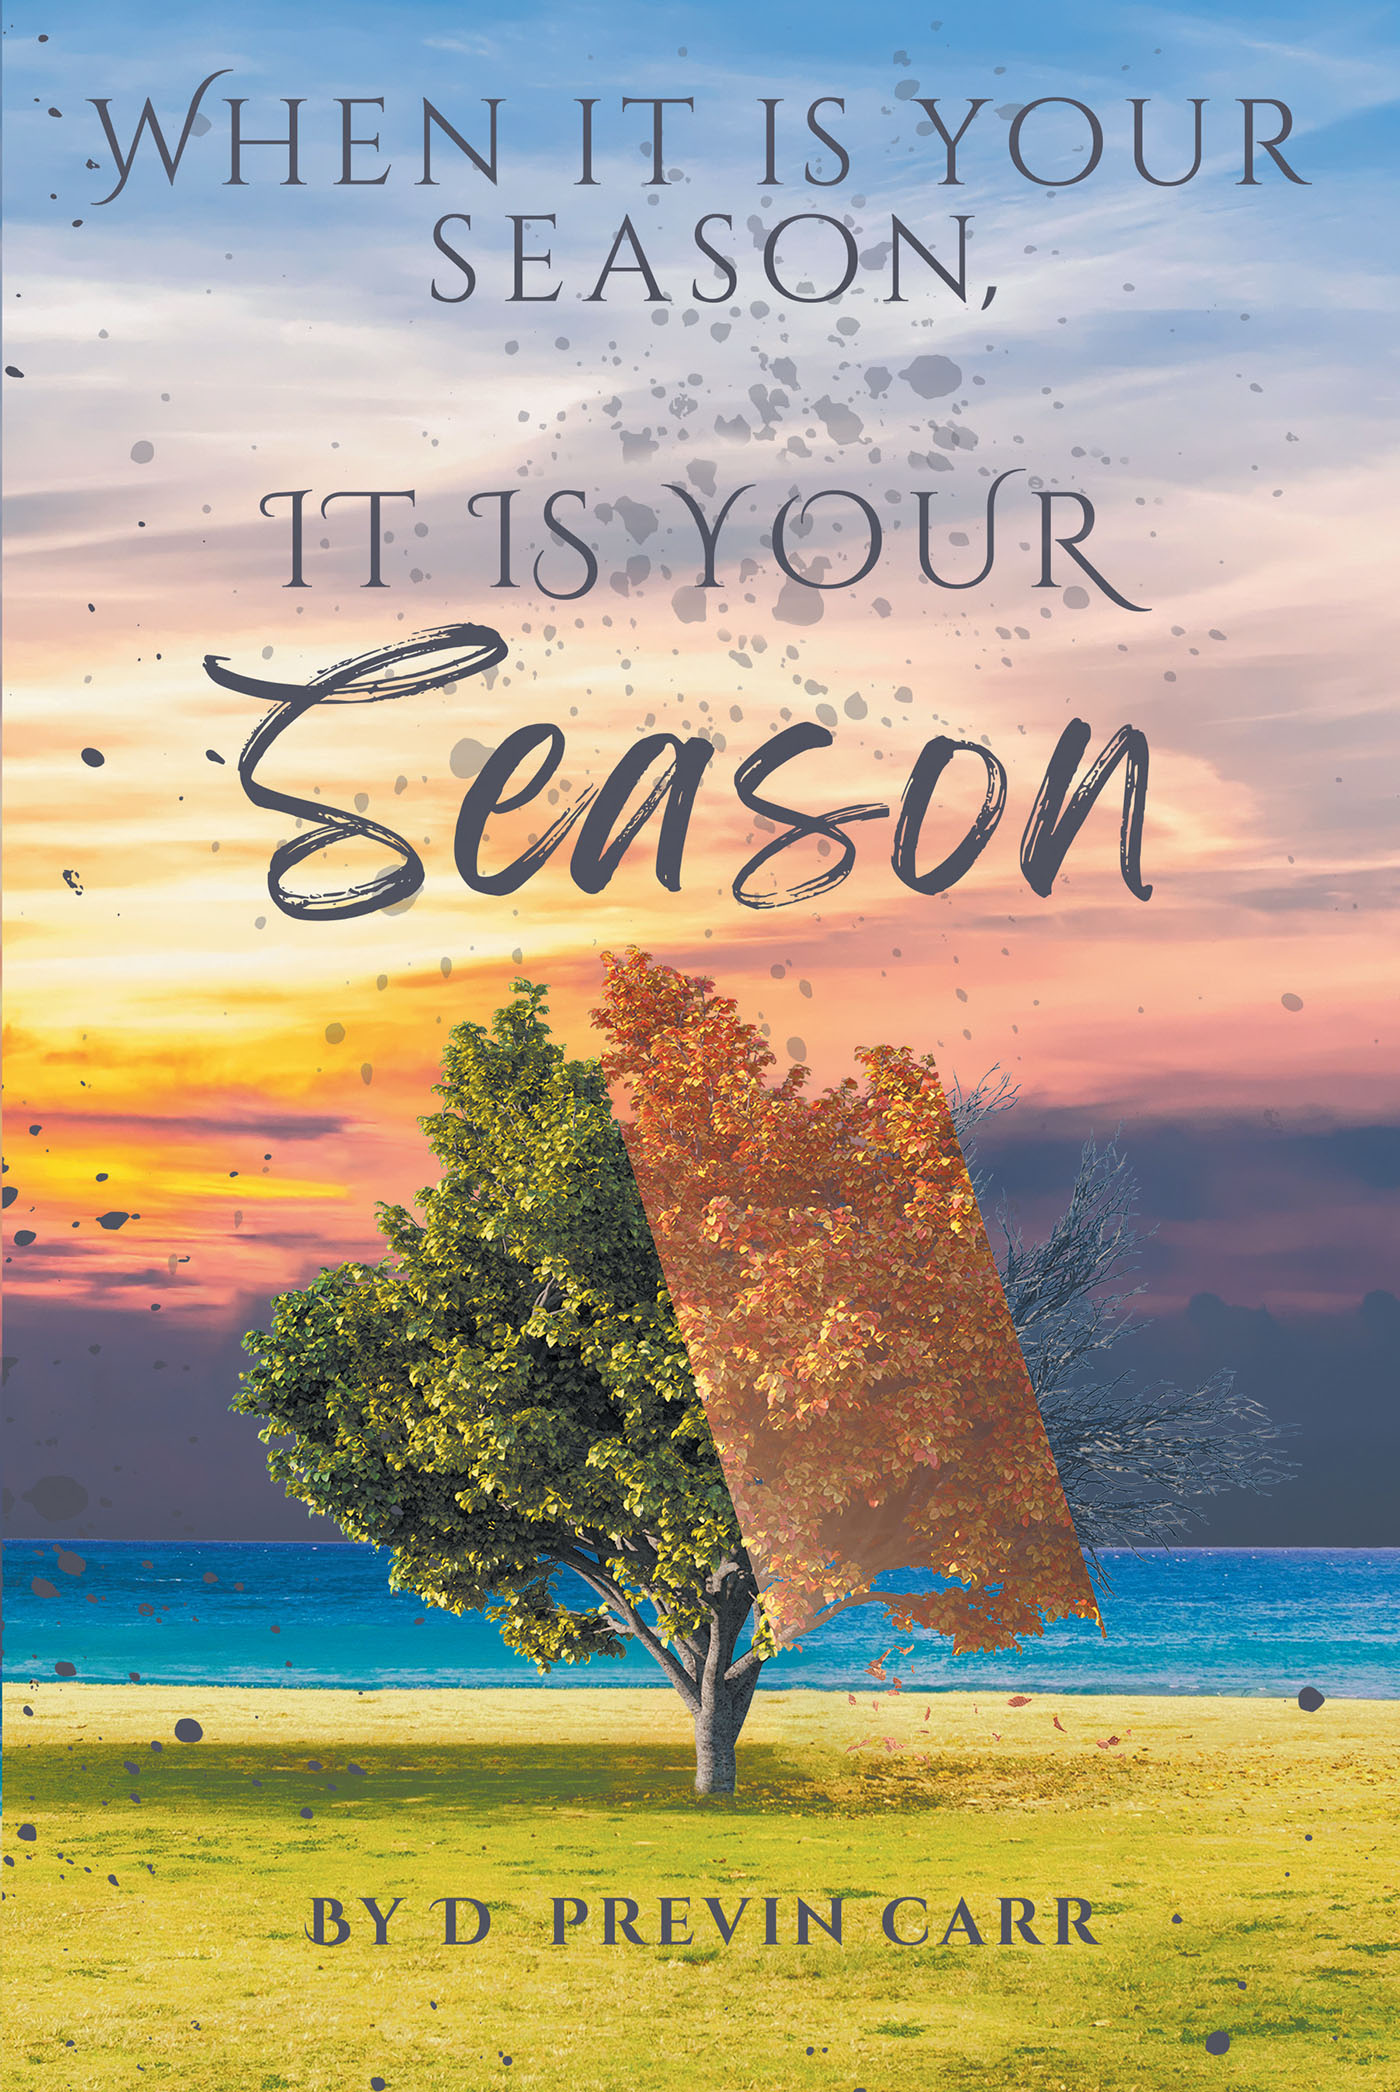 Author D. Previn Carr’s New Book, “When It Is Your Season, It Is Your Season,” Helps Readers Prepare for the Next Season, Dimension, and Level of Their Lives